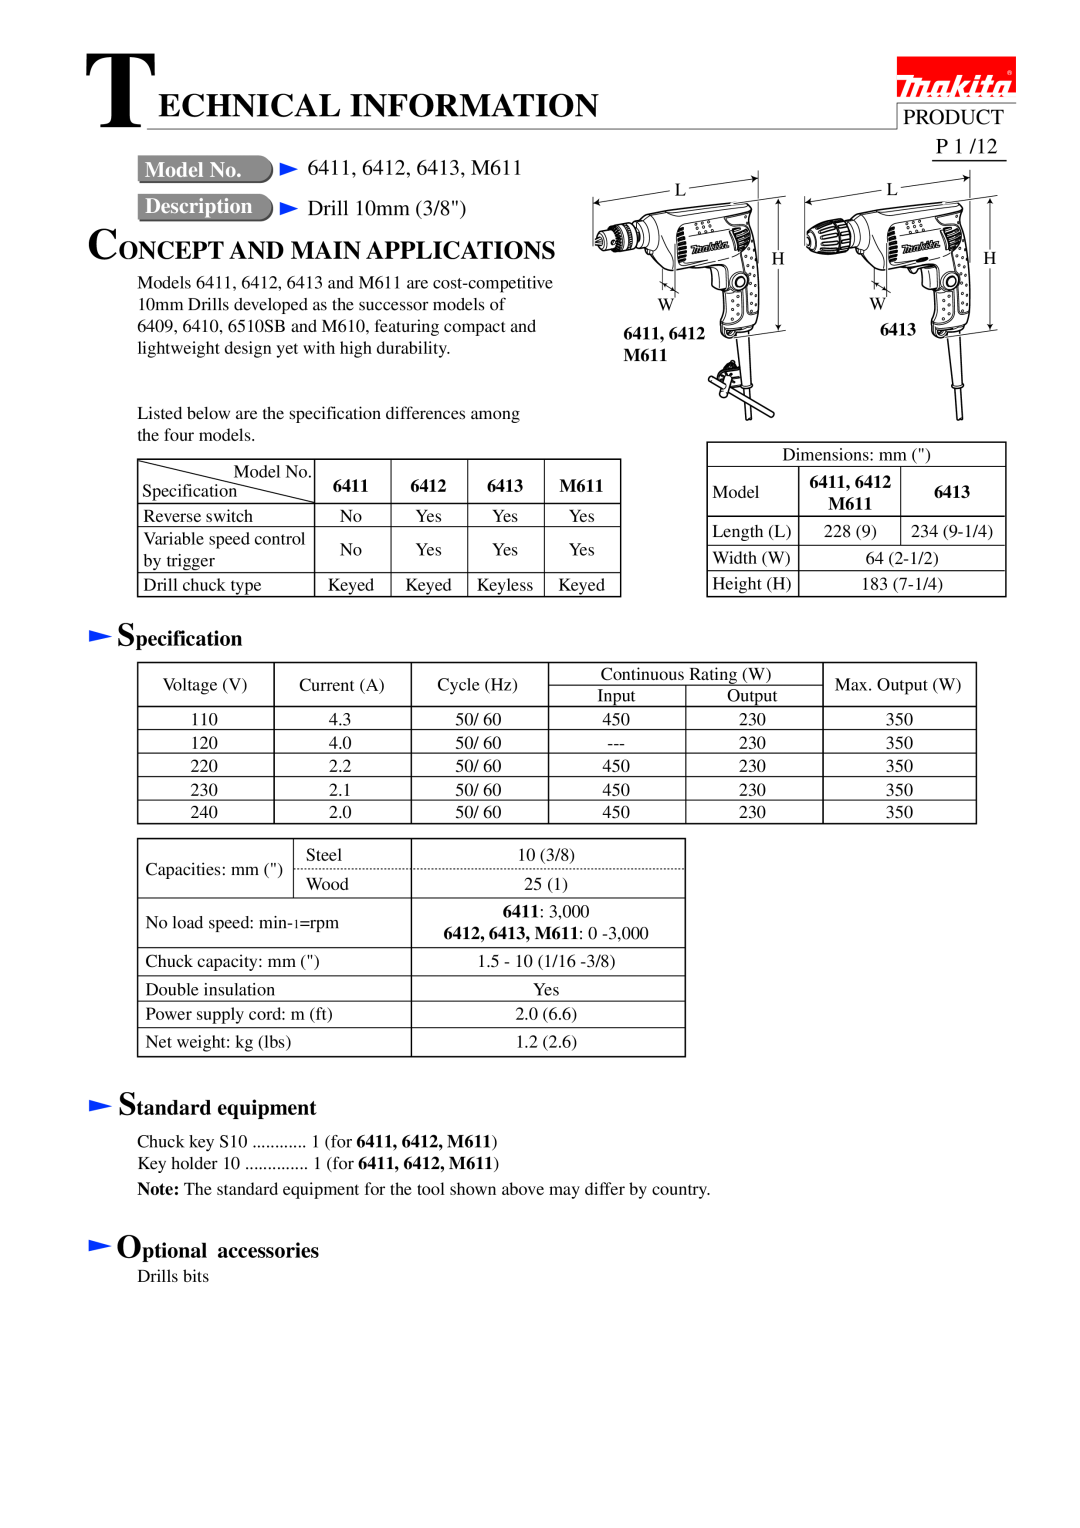 Makita 6412 specifications Product, P 1 /12, Specification, Standard equipment, Optional accessories, 6411, 6413, M611 